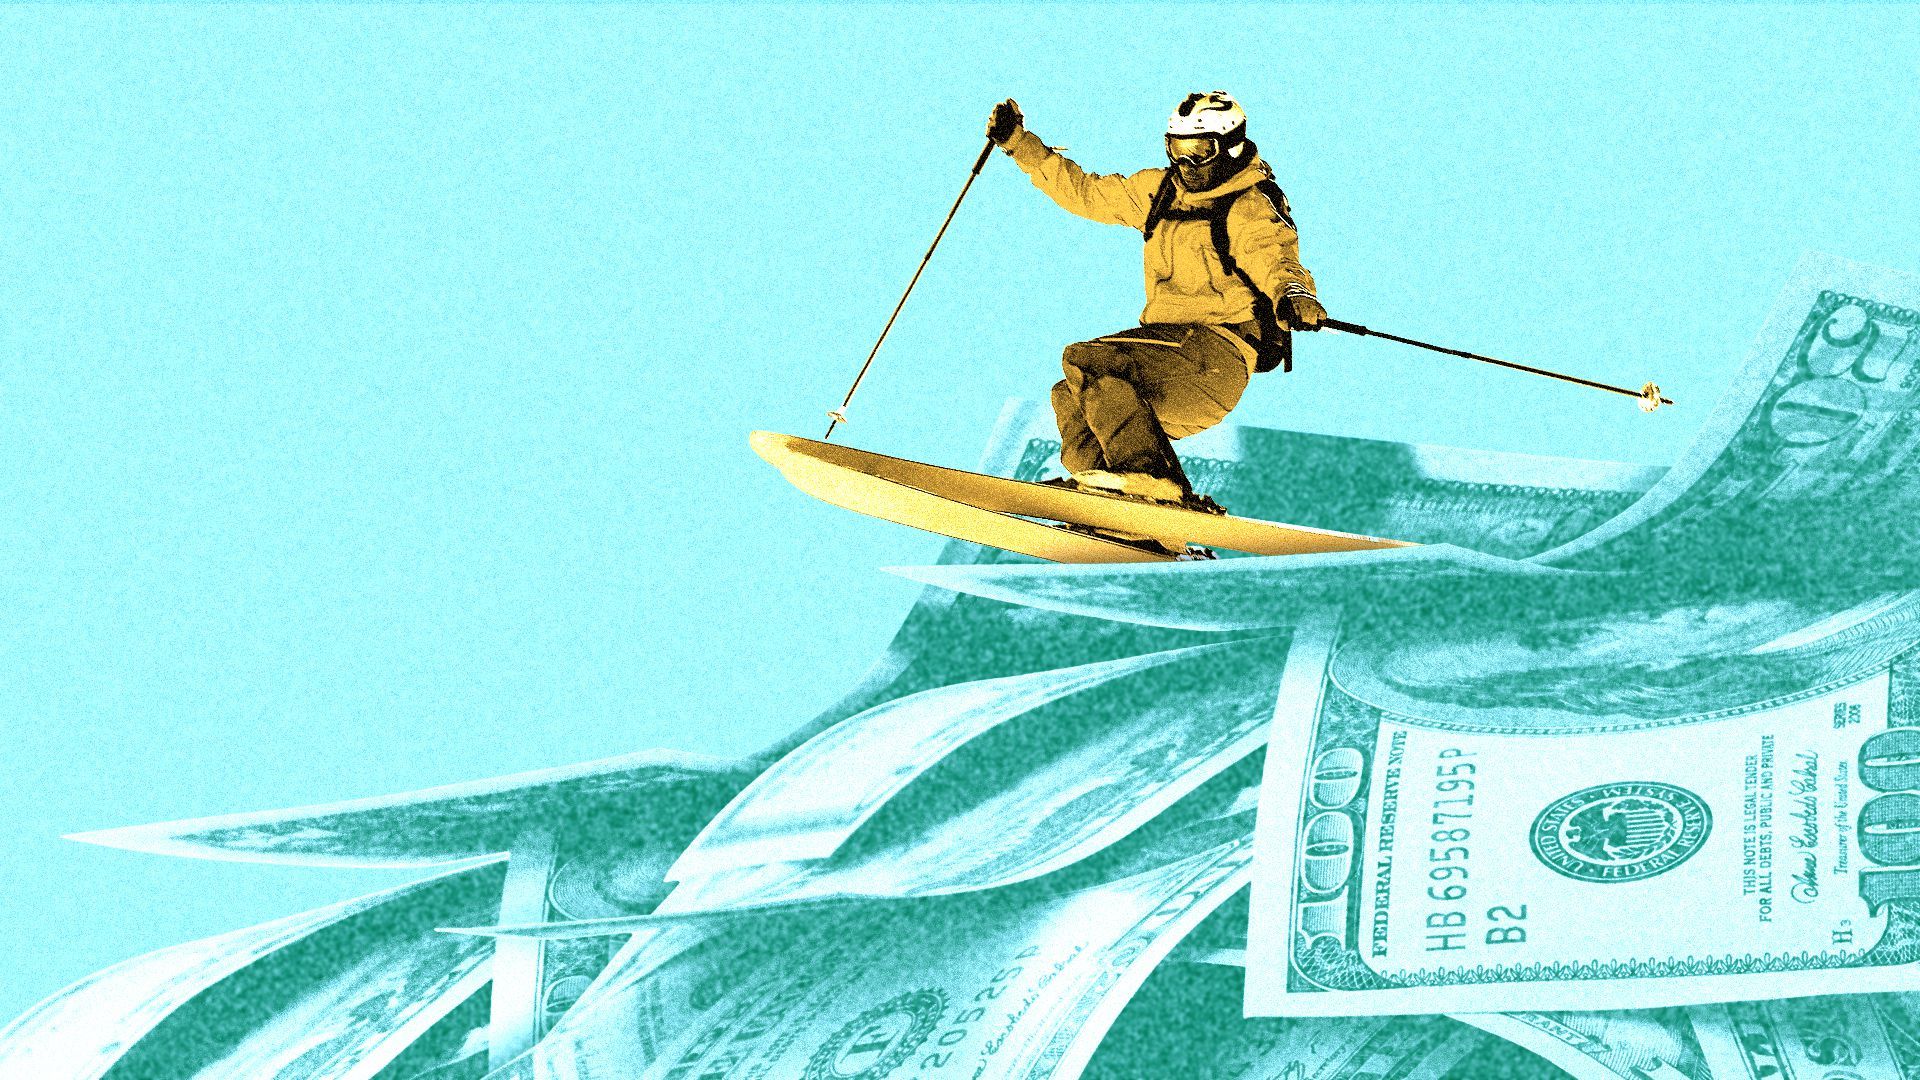 Illustration of a person skiing on a mountain made of money.